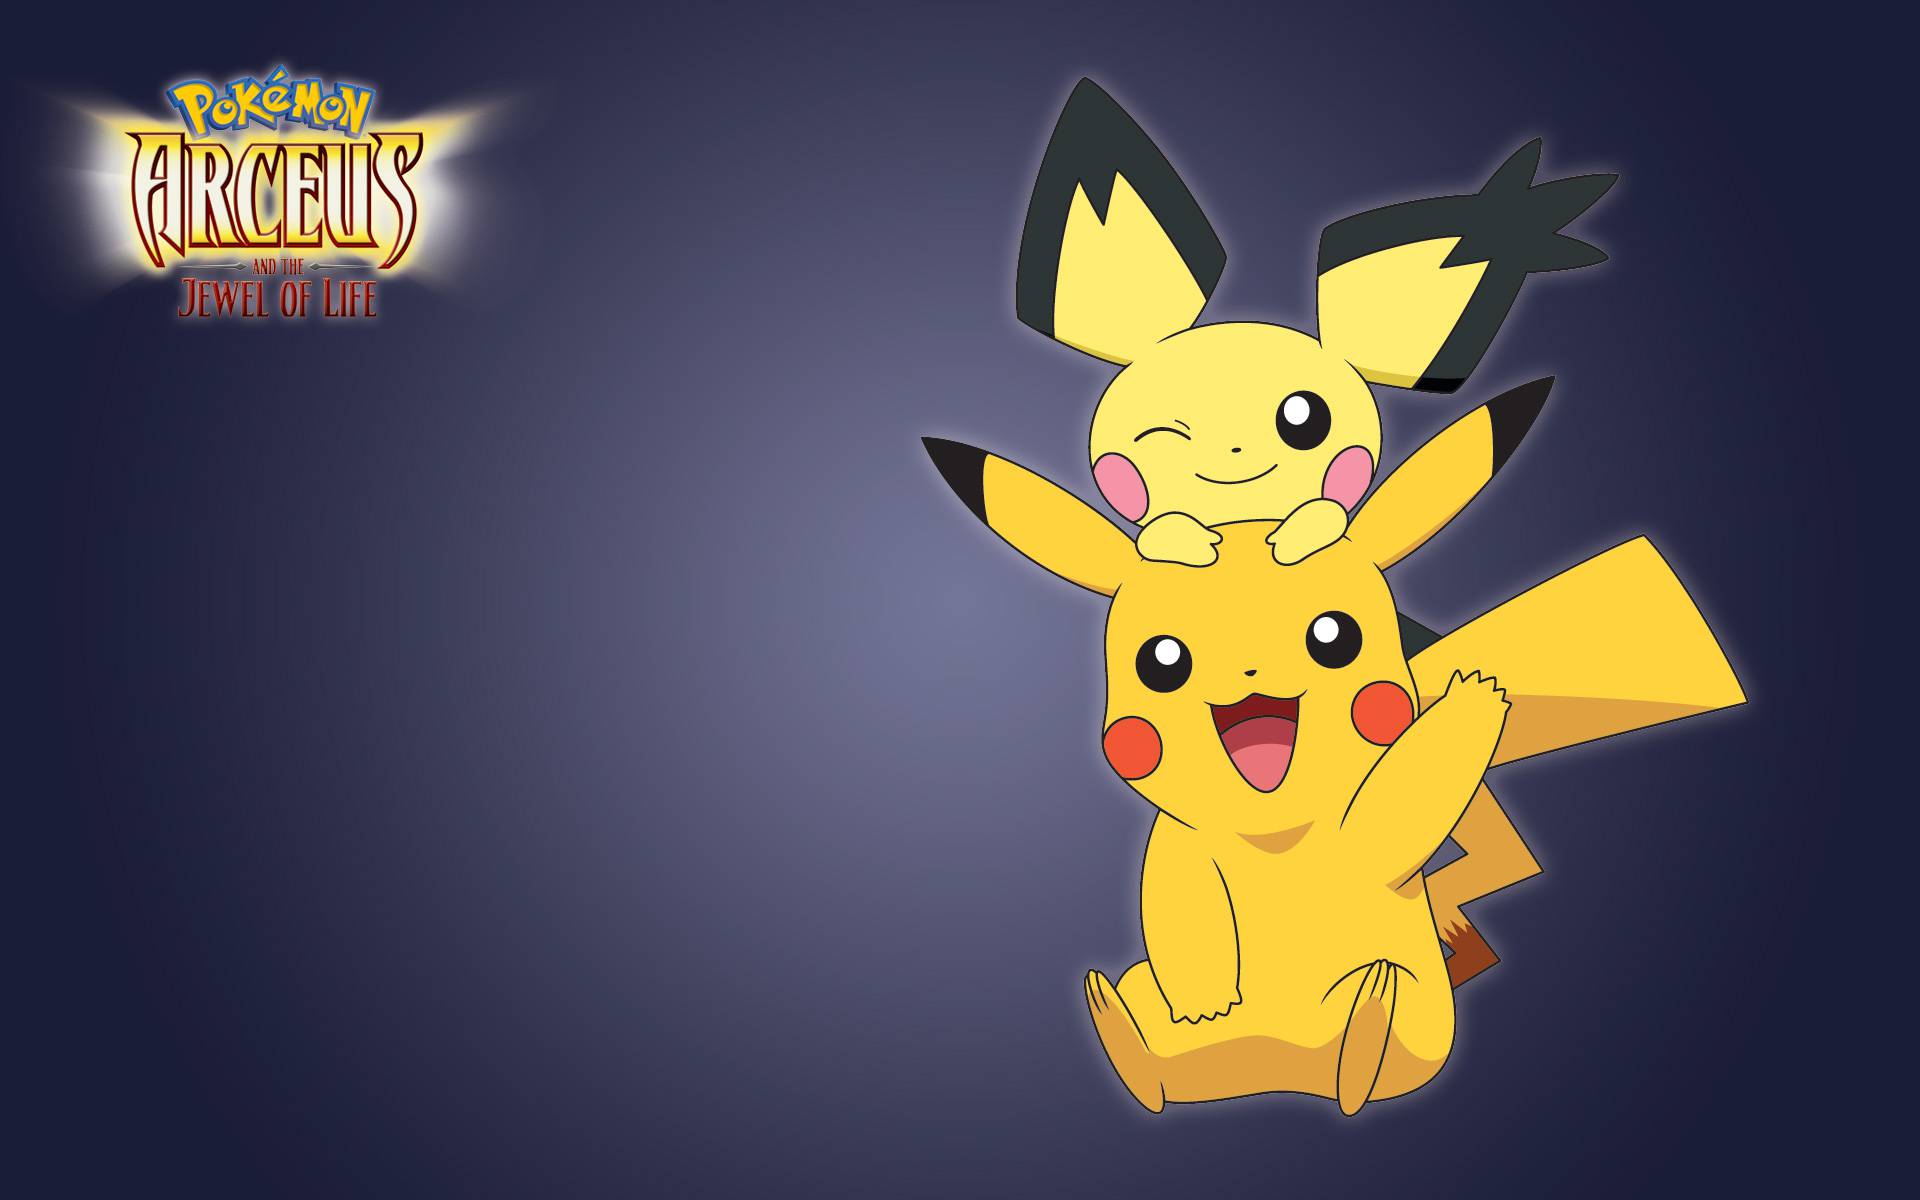 Arceus movie wall wallpaper - - High Quality and other